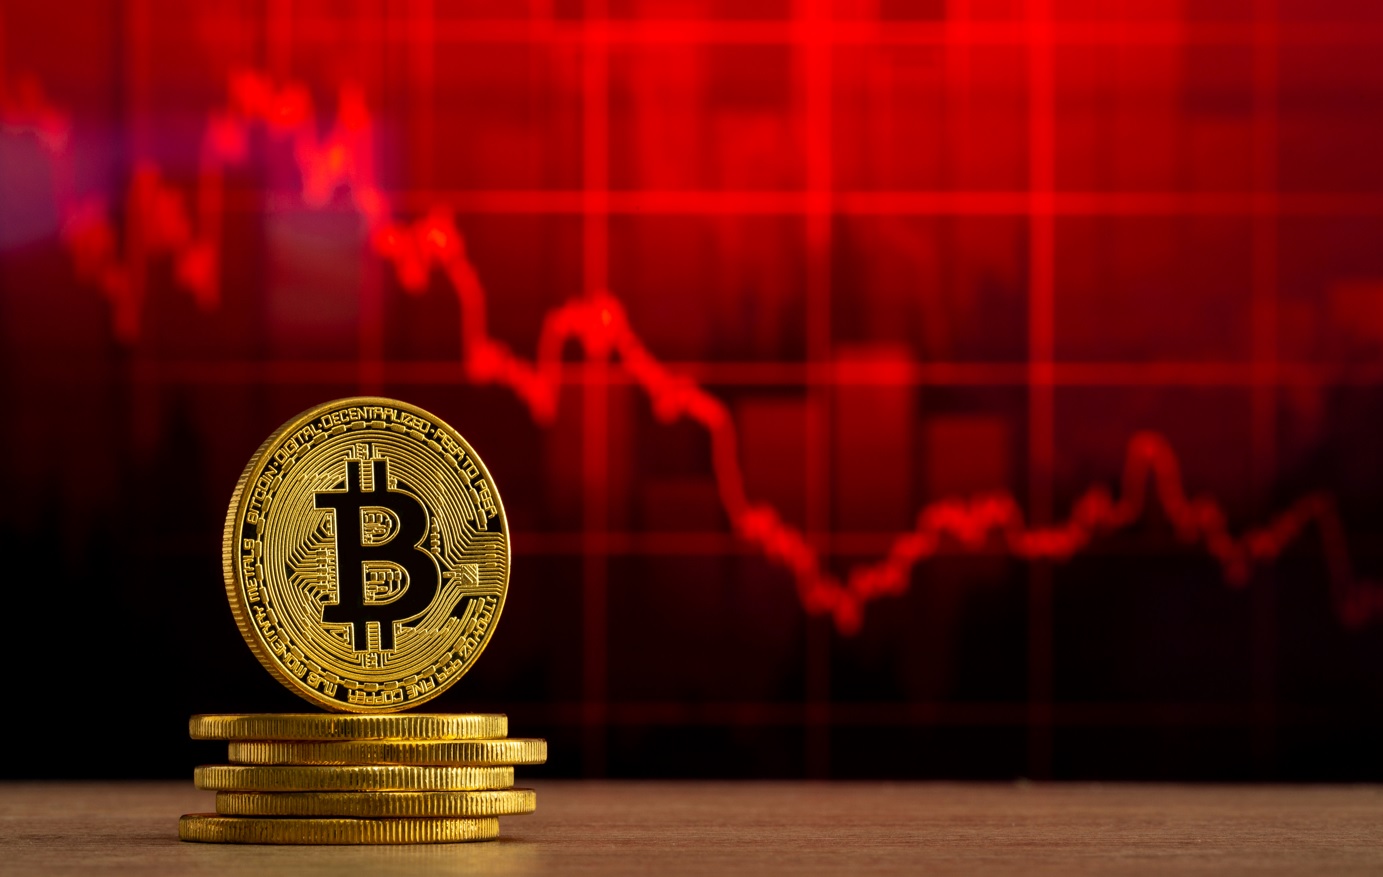 Evaluating Cryptocurrency Risks for Retail Investors